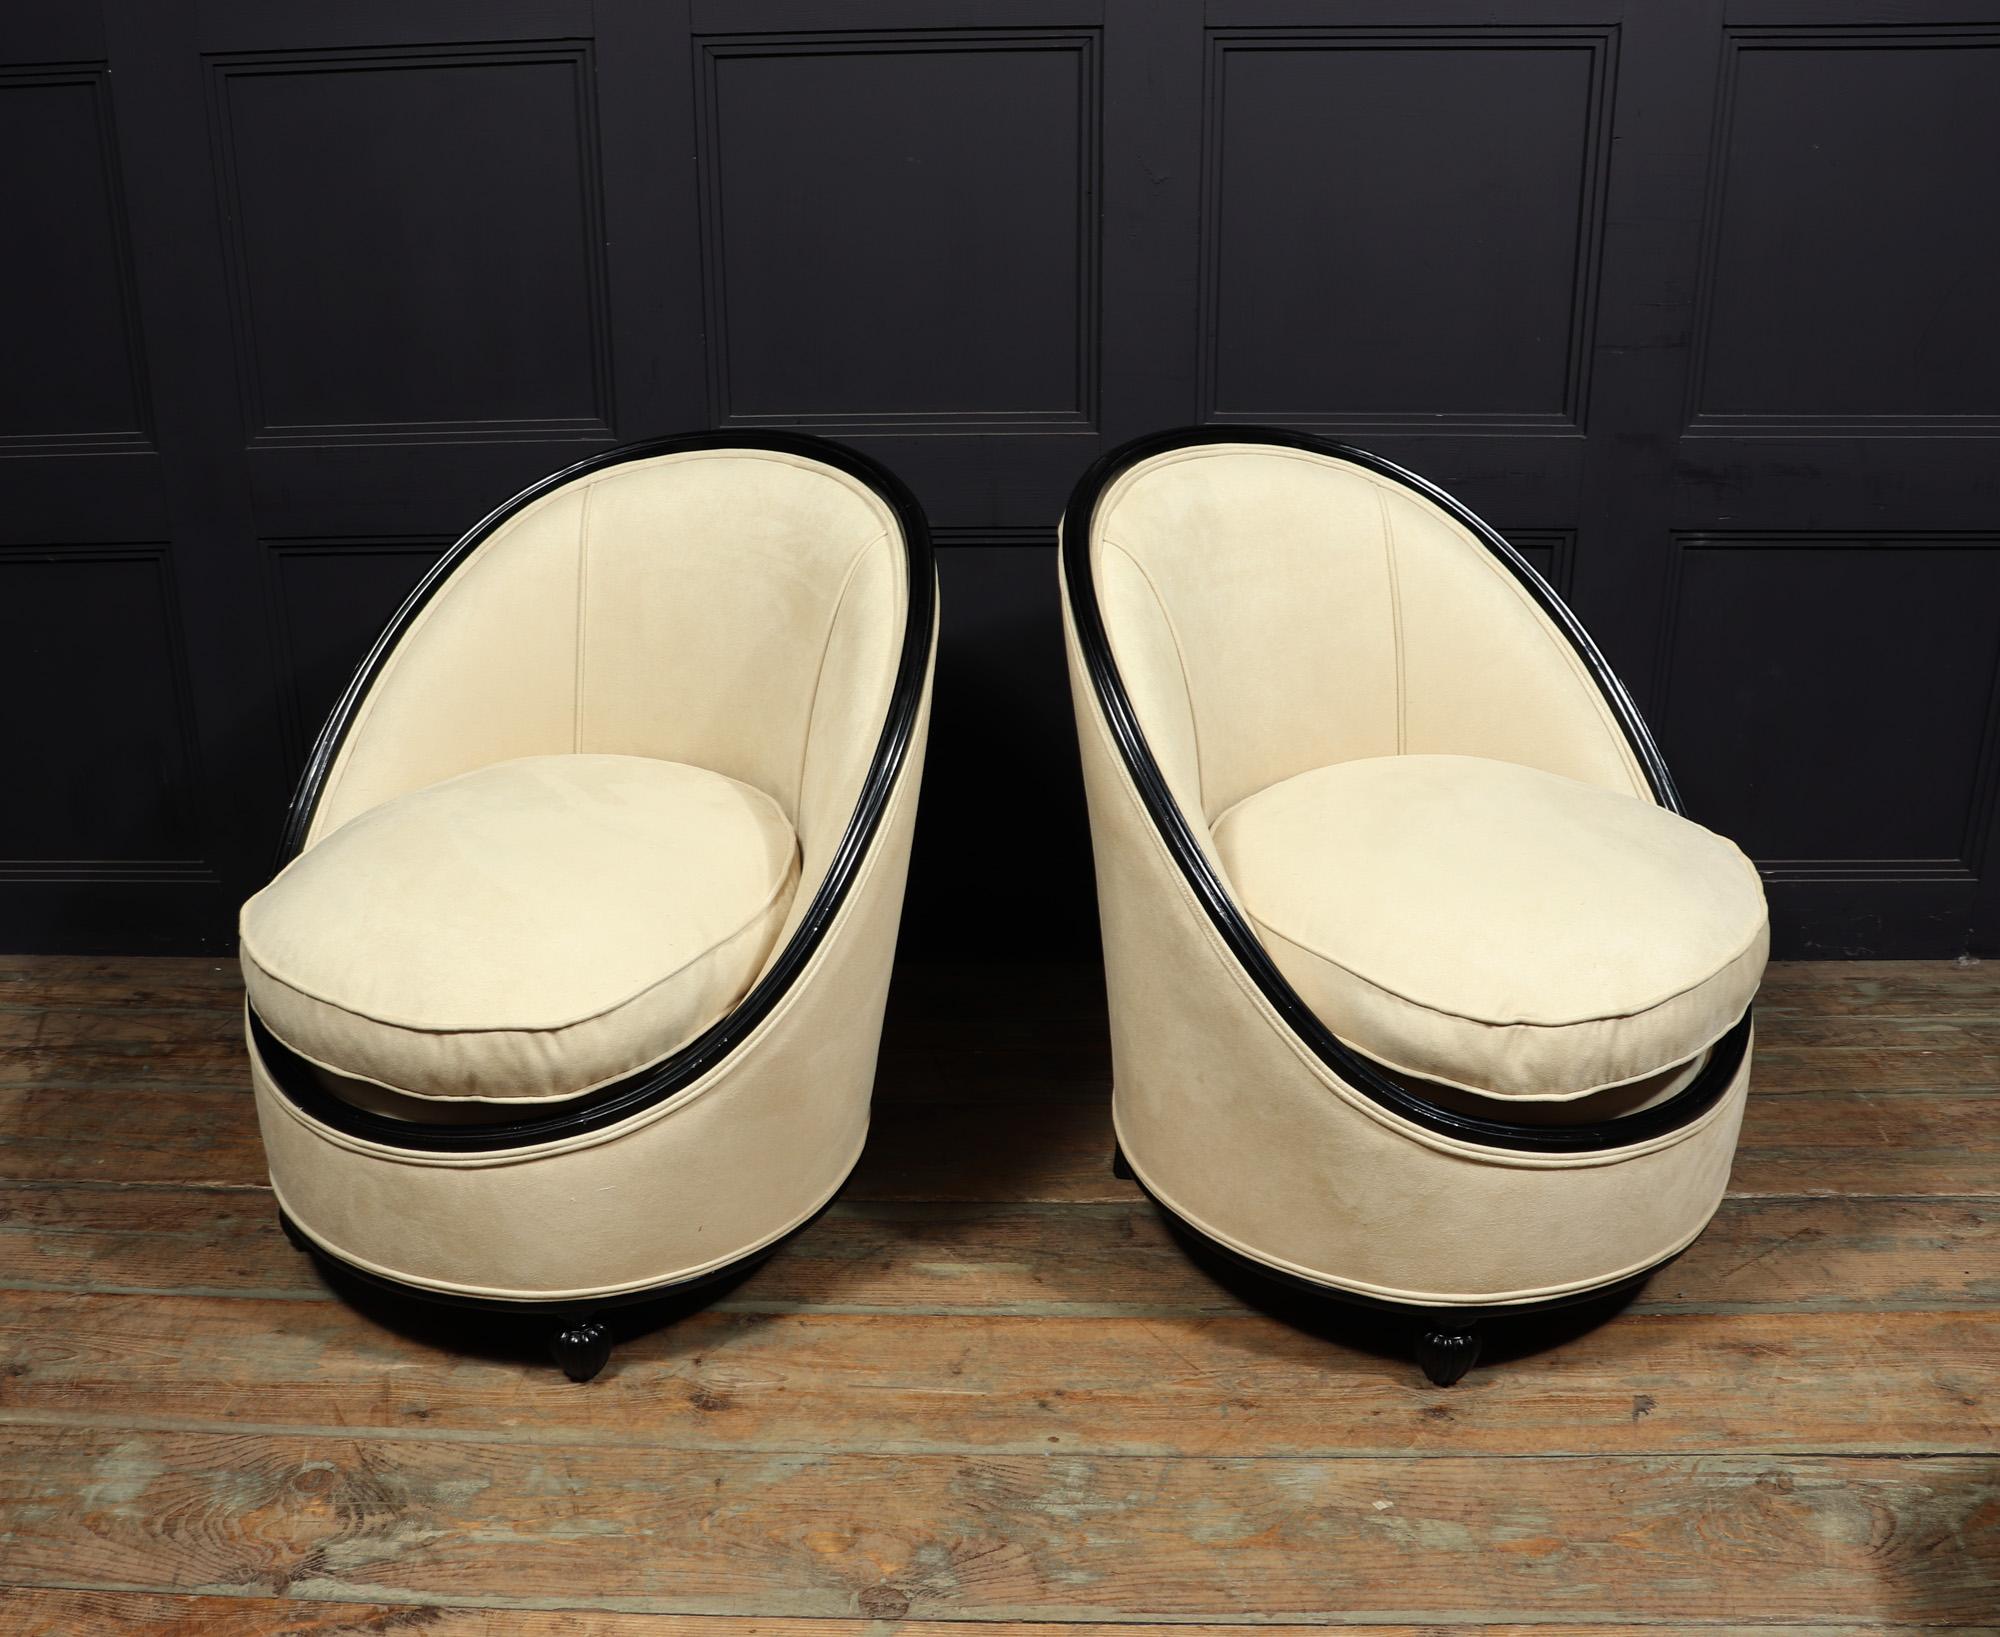 French Art Deco Salon Chairs Manner of Ruhlman c1925 For Sale 4